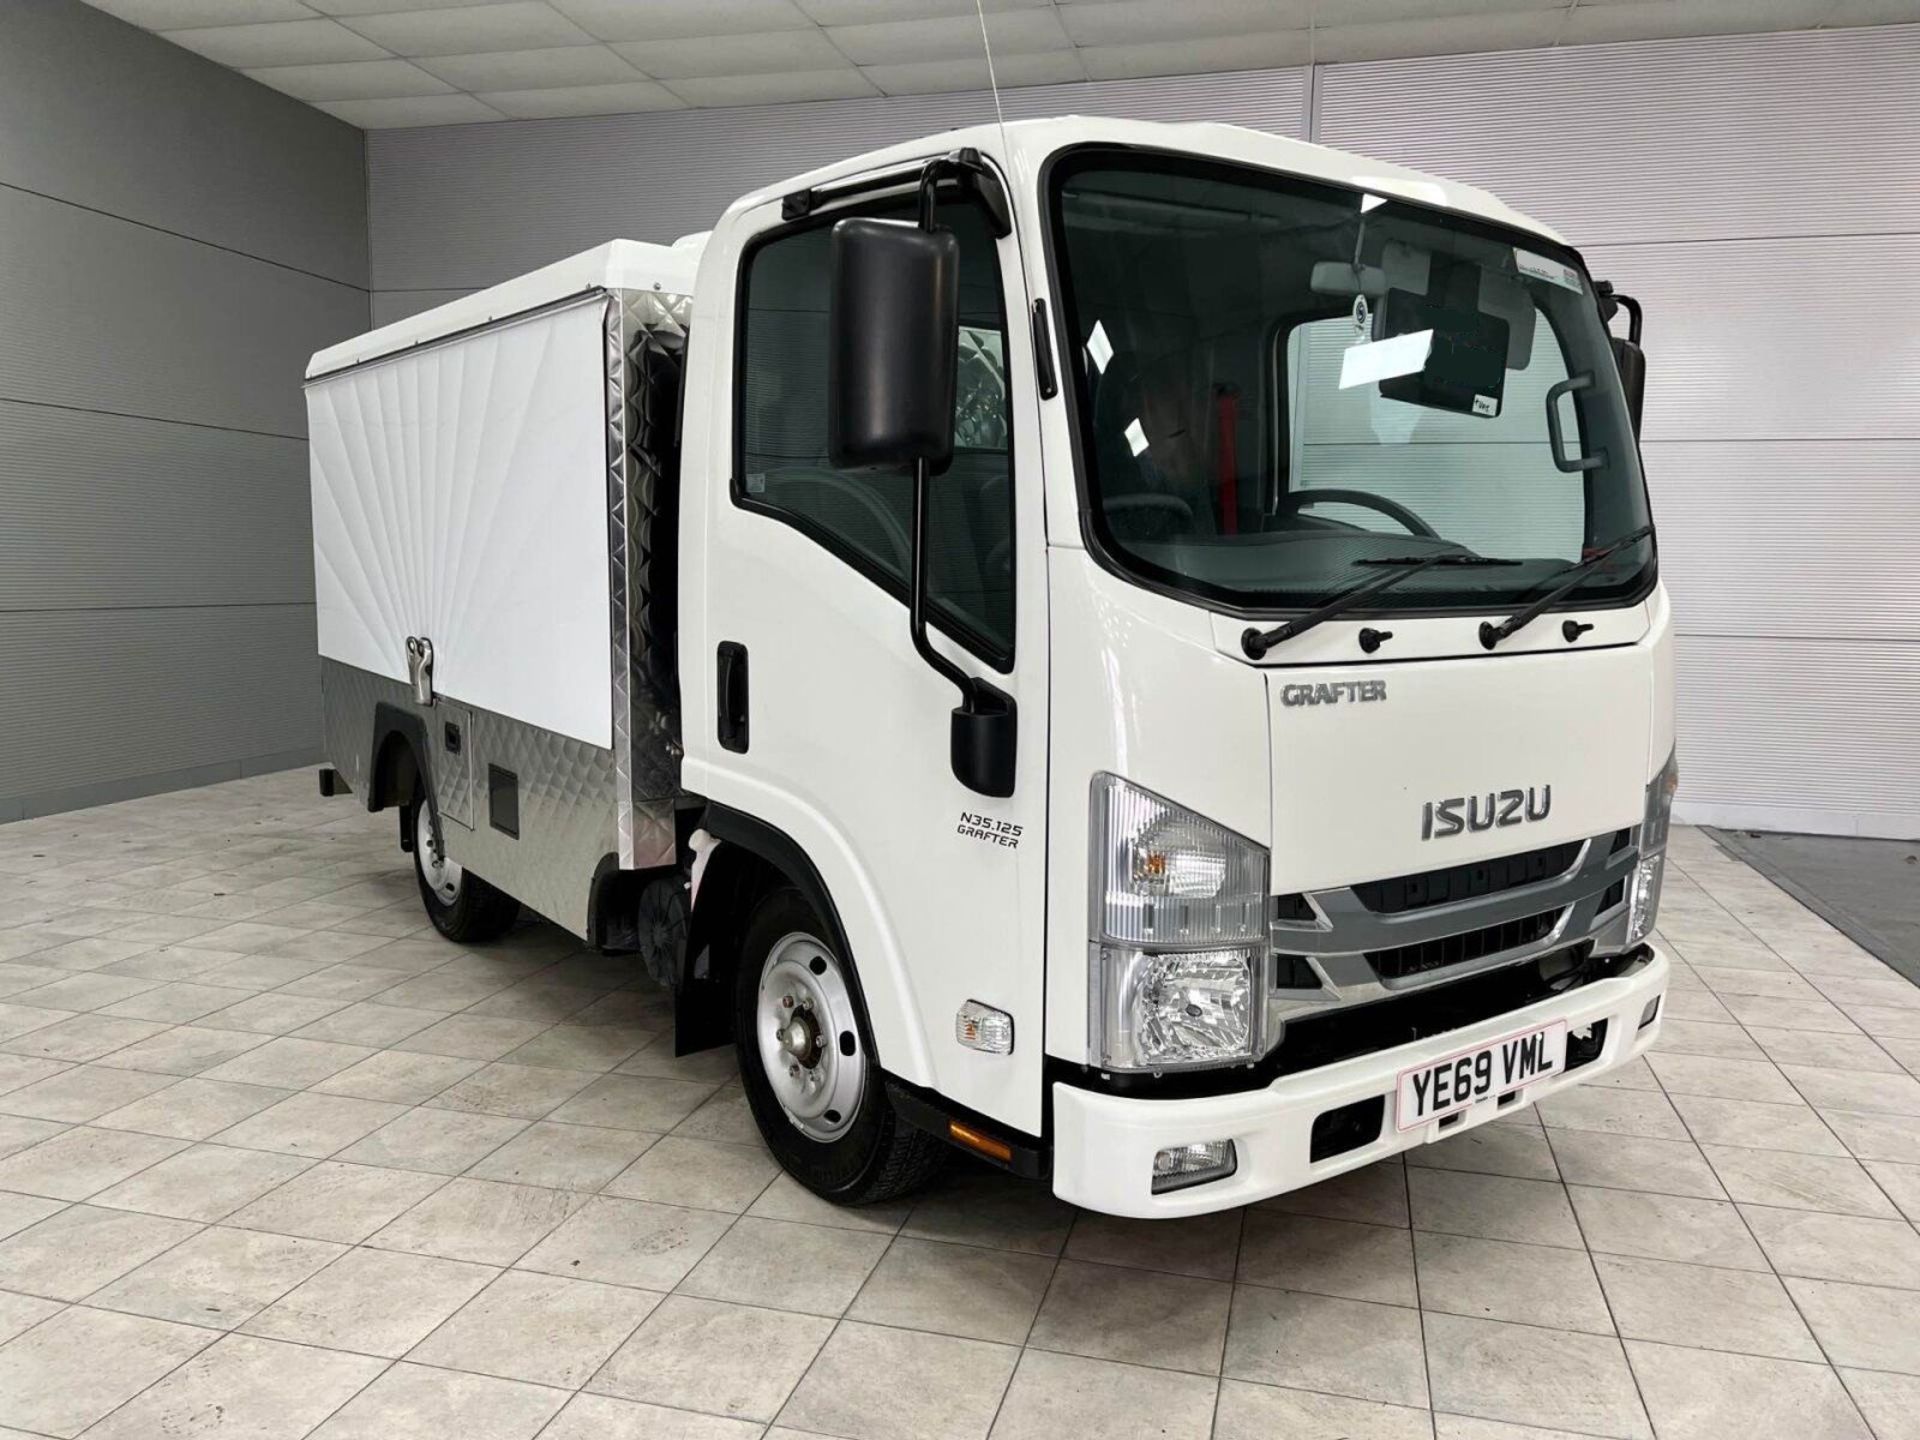 2020 ISUZU GRAFTER N35.125S 1.9 TD 121 BHP JIFFY MOBILE CATERING VAN, 3,230 MILES, SOLD WITH NEW MOT - Image 2 of 20